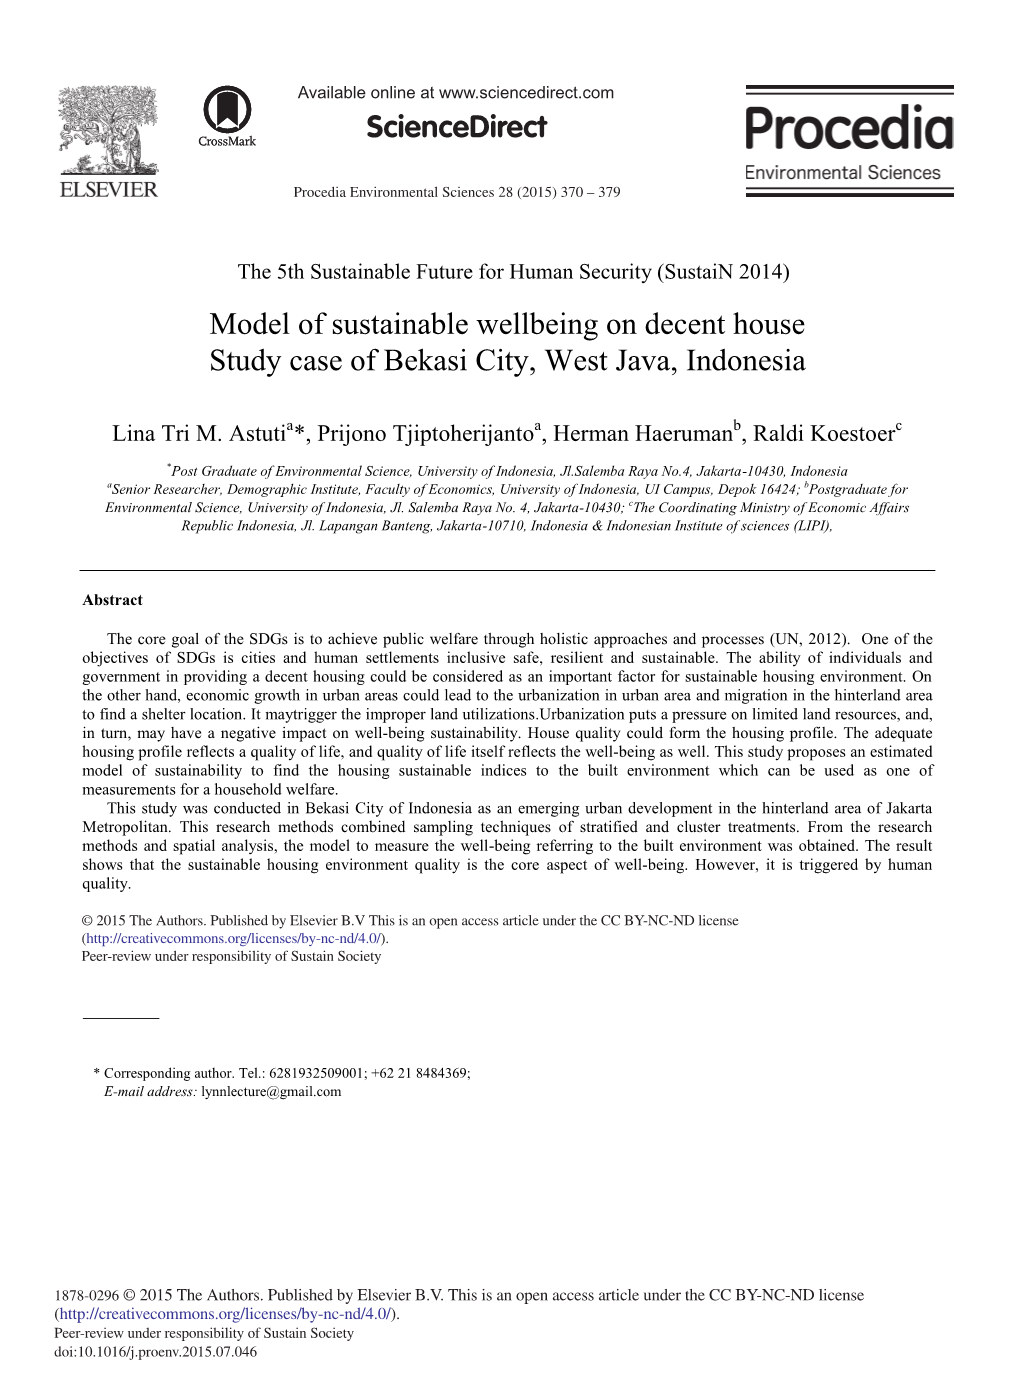 Model of Sustainable Wellbeing on Decent House Study Case of Bekasi City, West Java, Indonesia